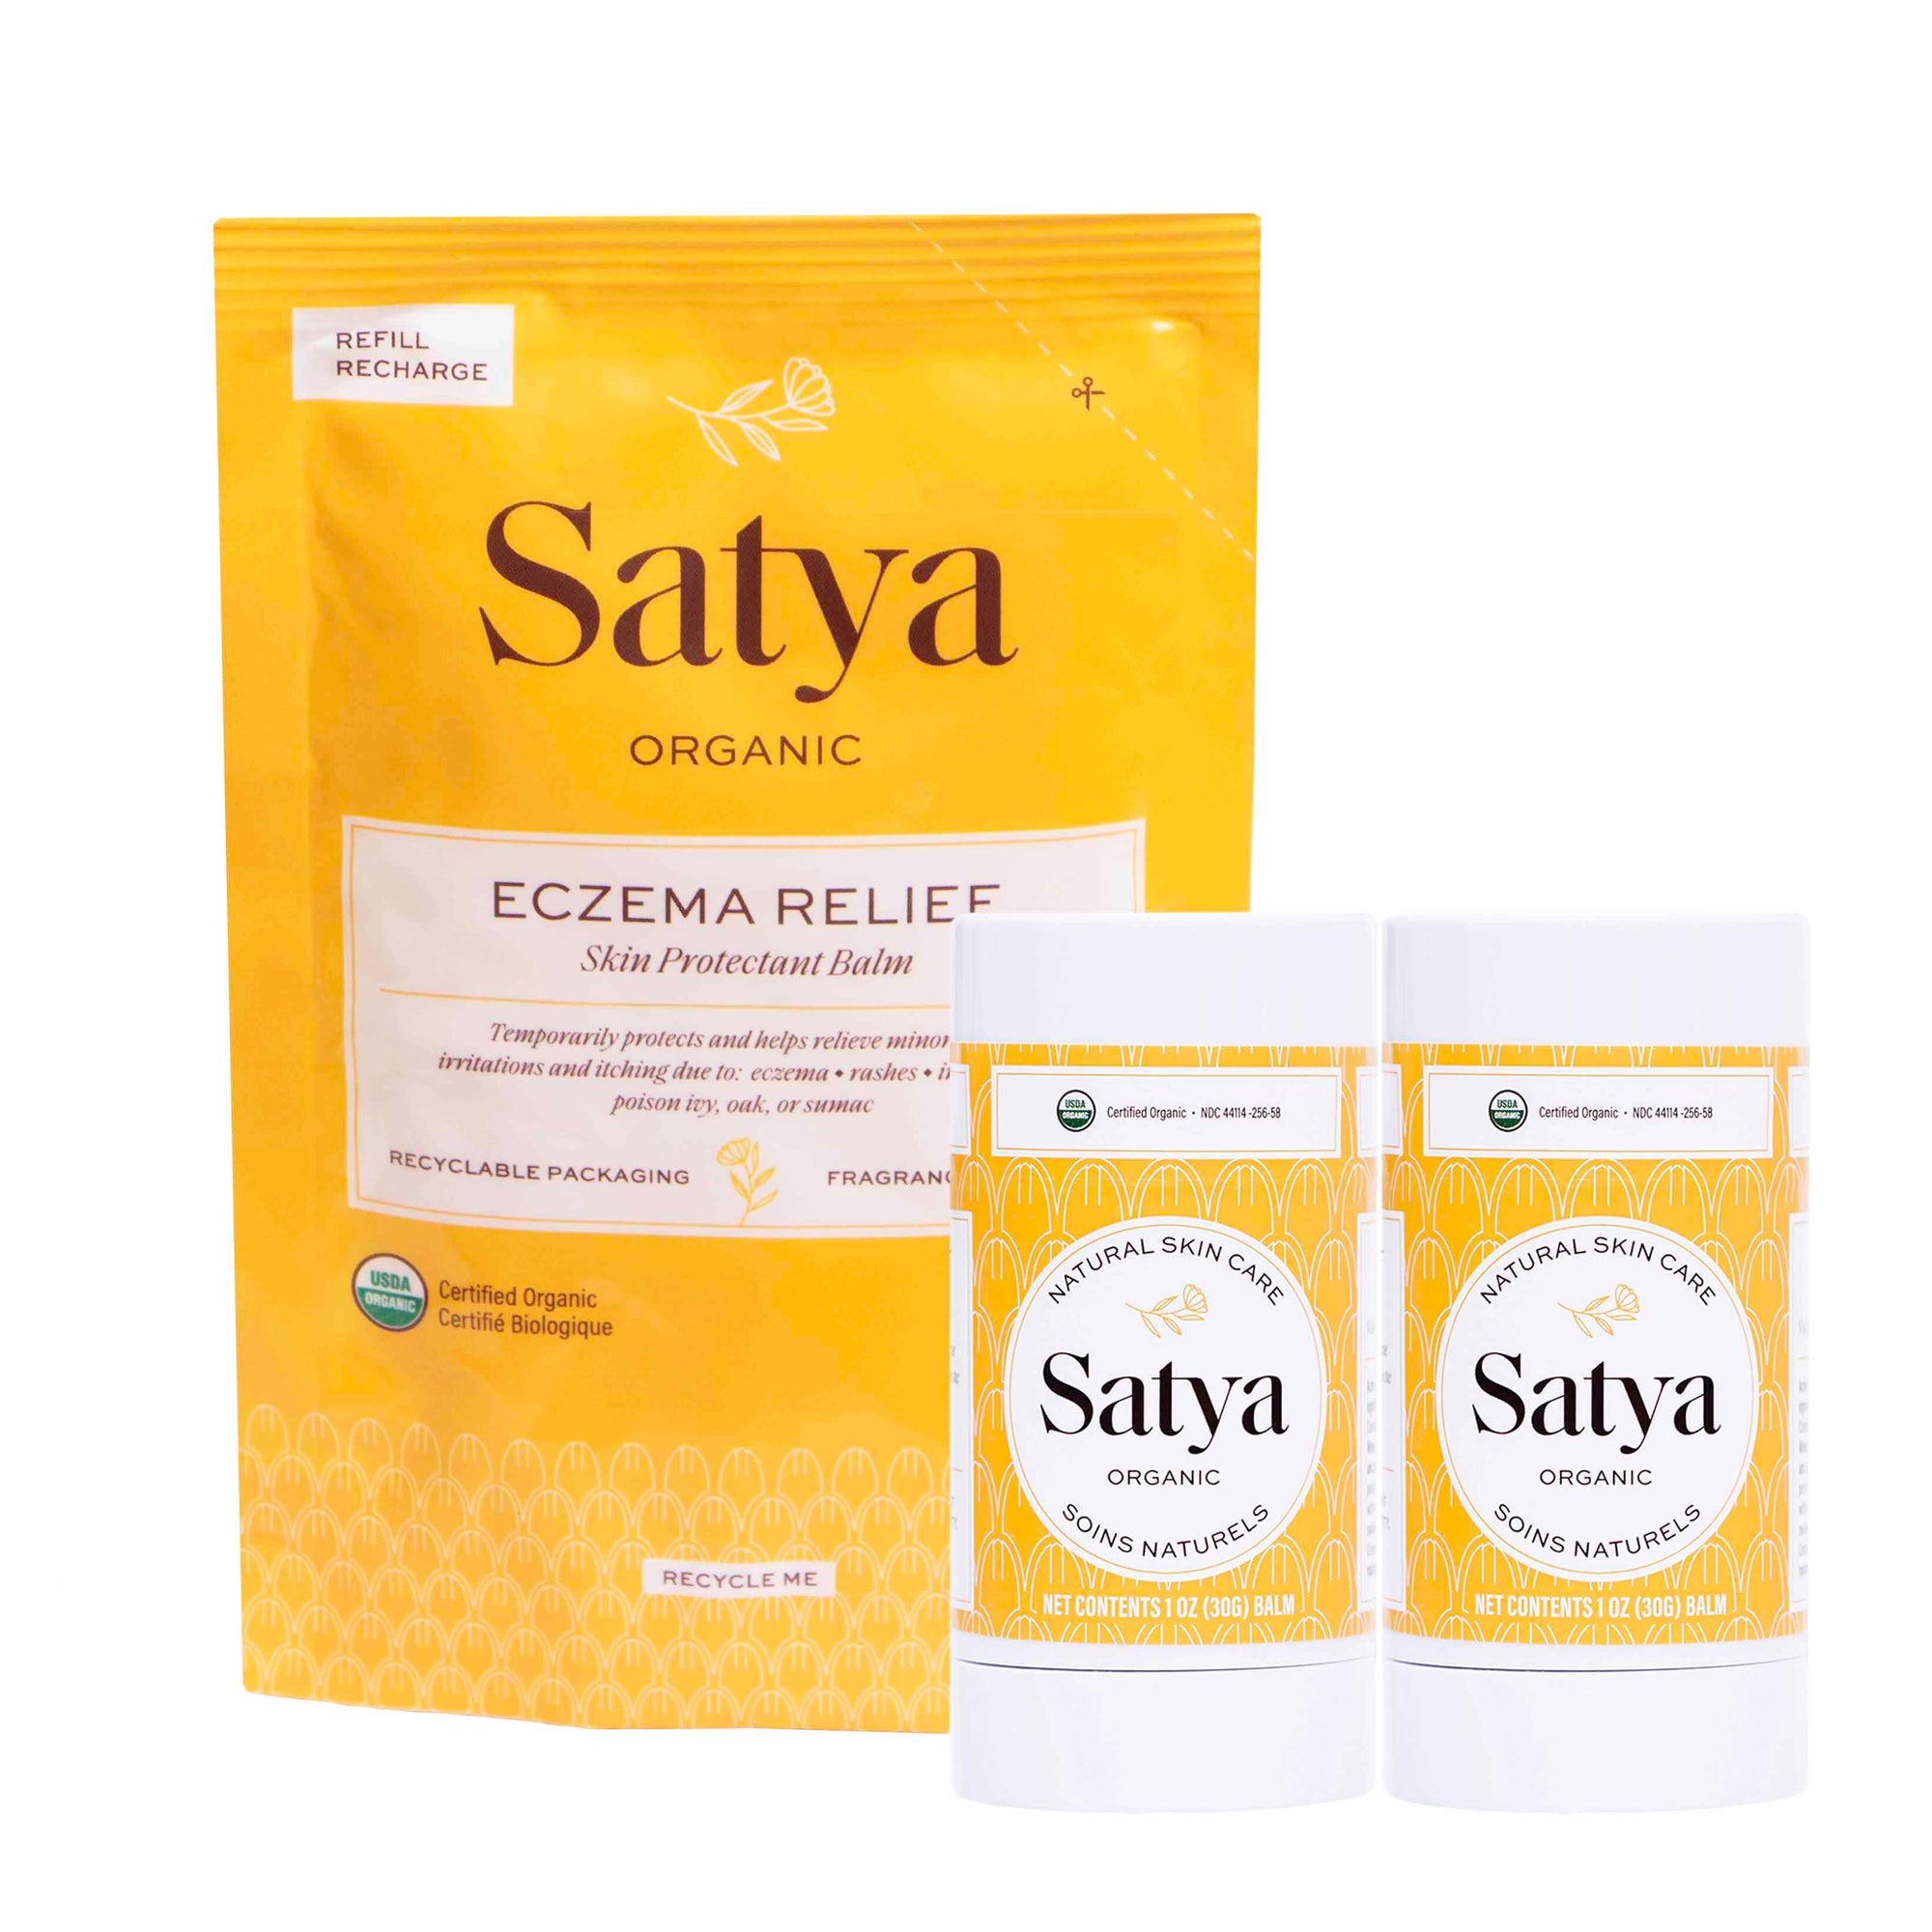 Satya Refill Pouch and two Satya Eczema Relief Sticks